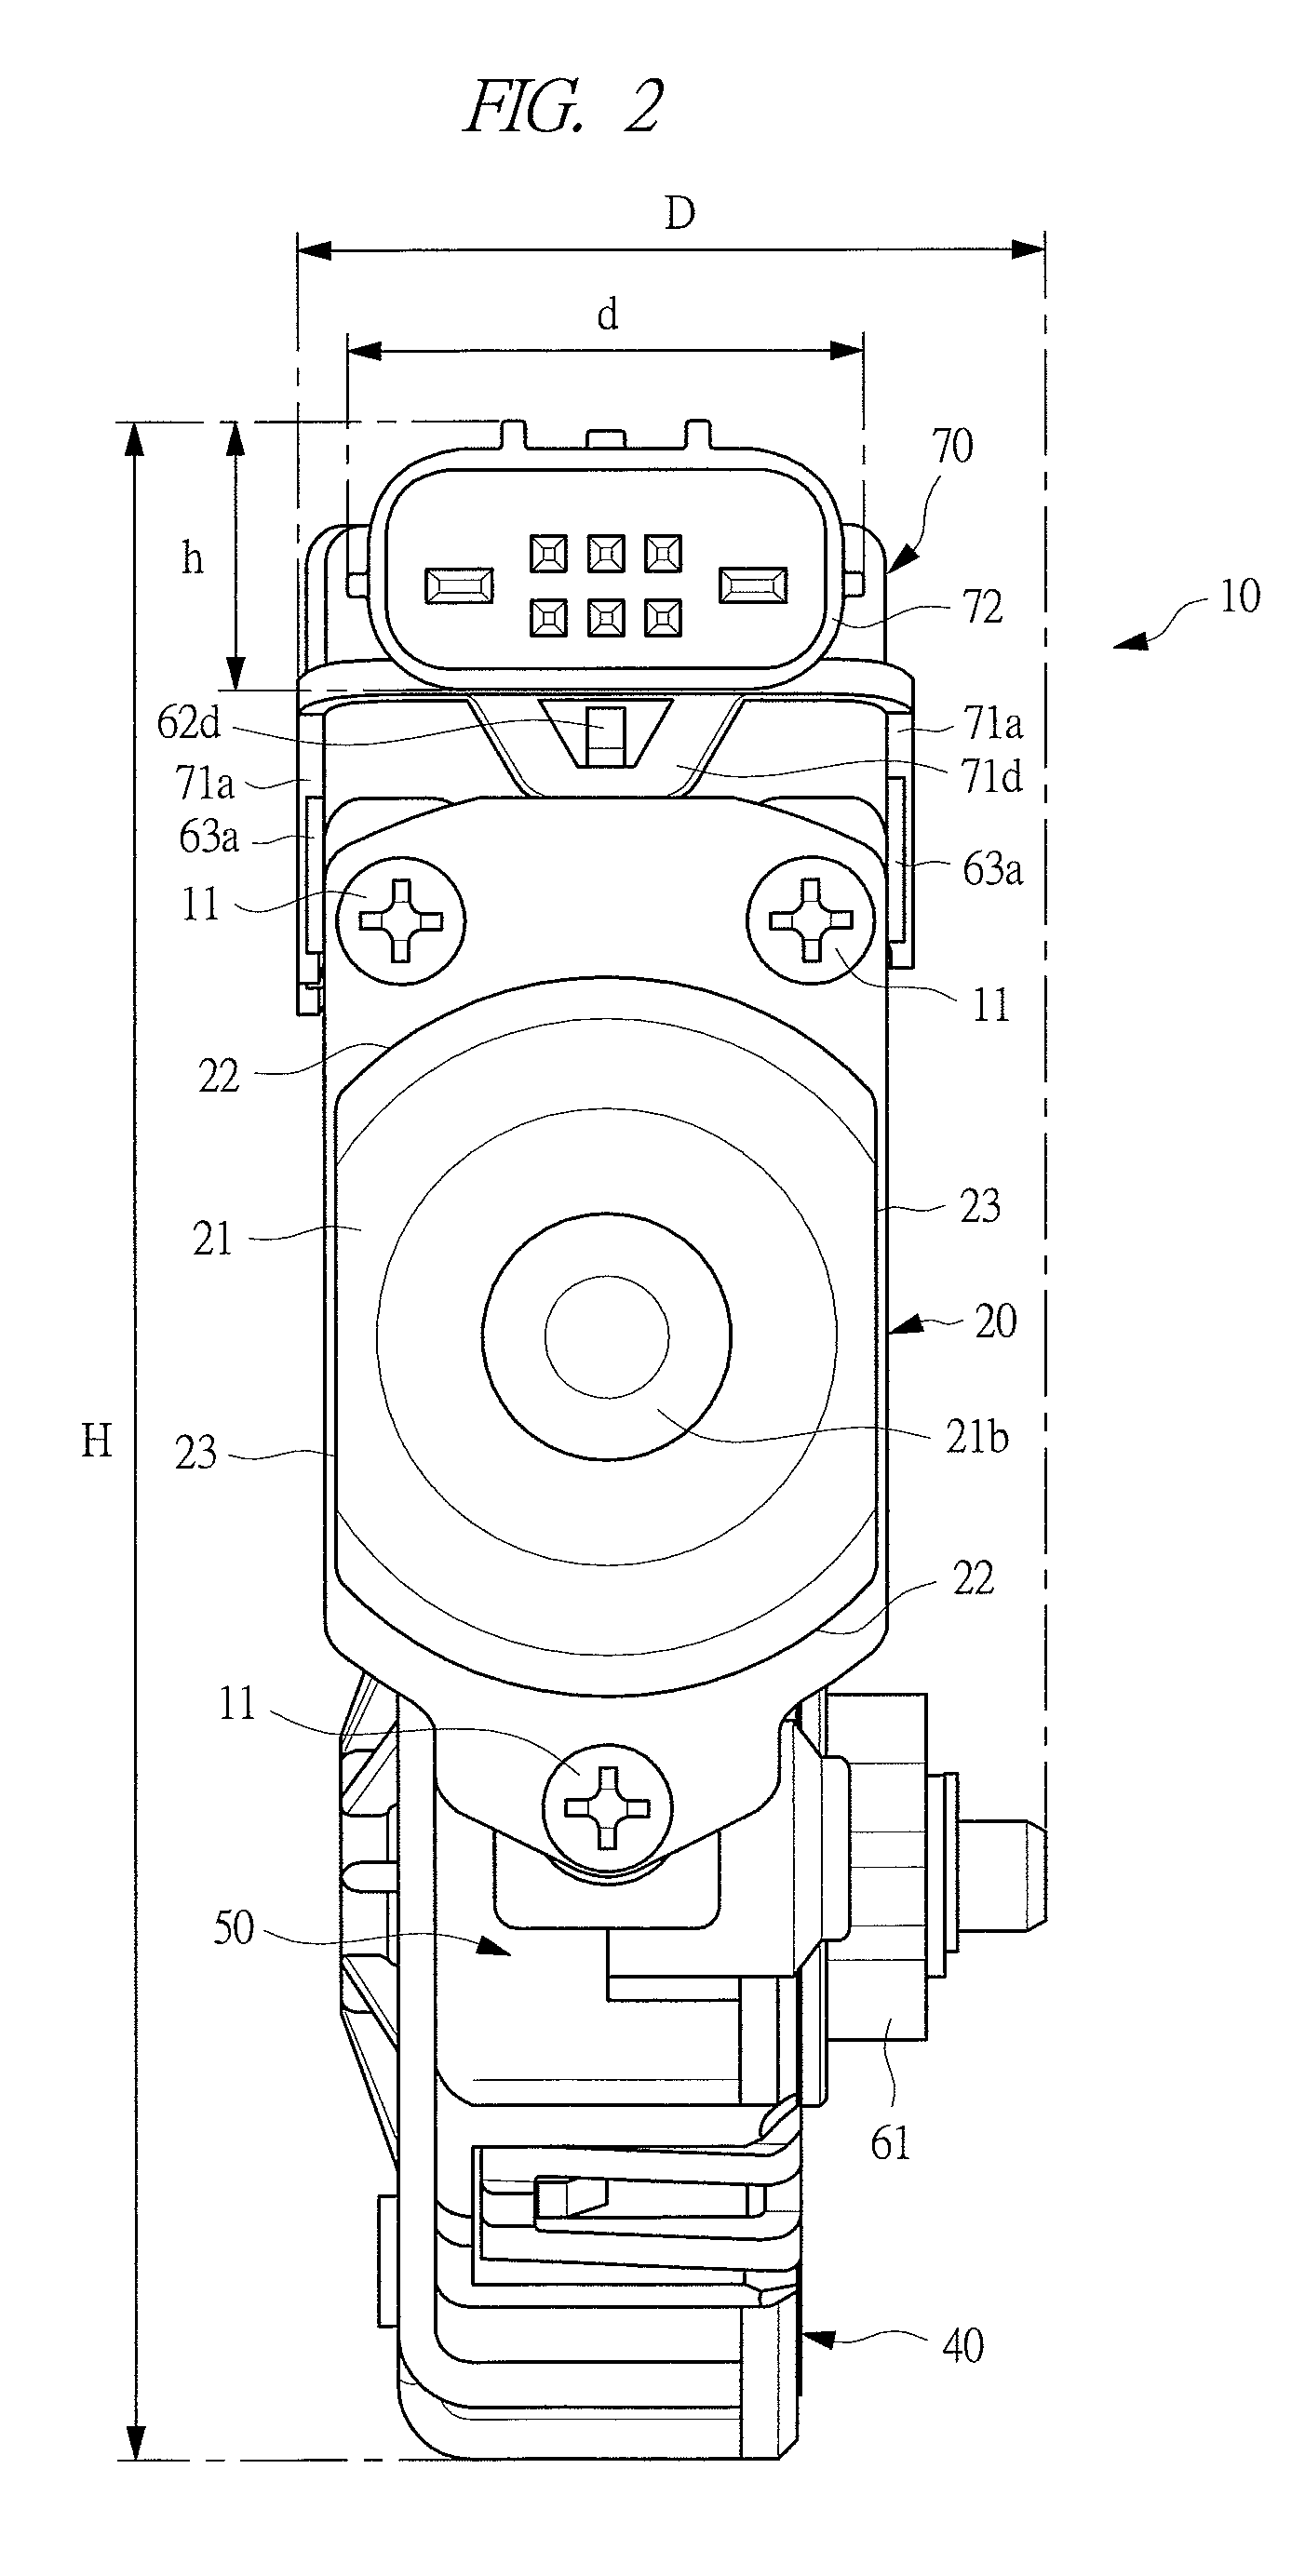 Motor with speed reduction mechanism